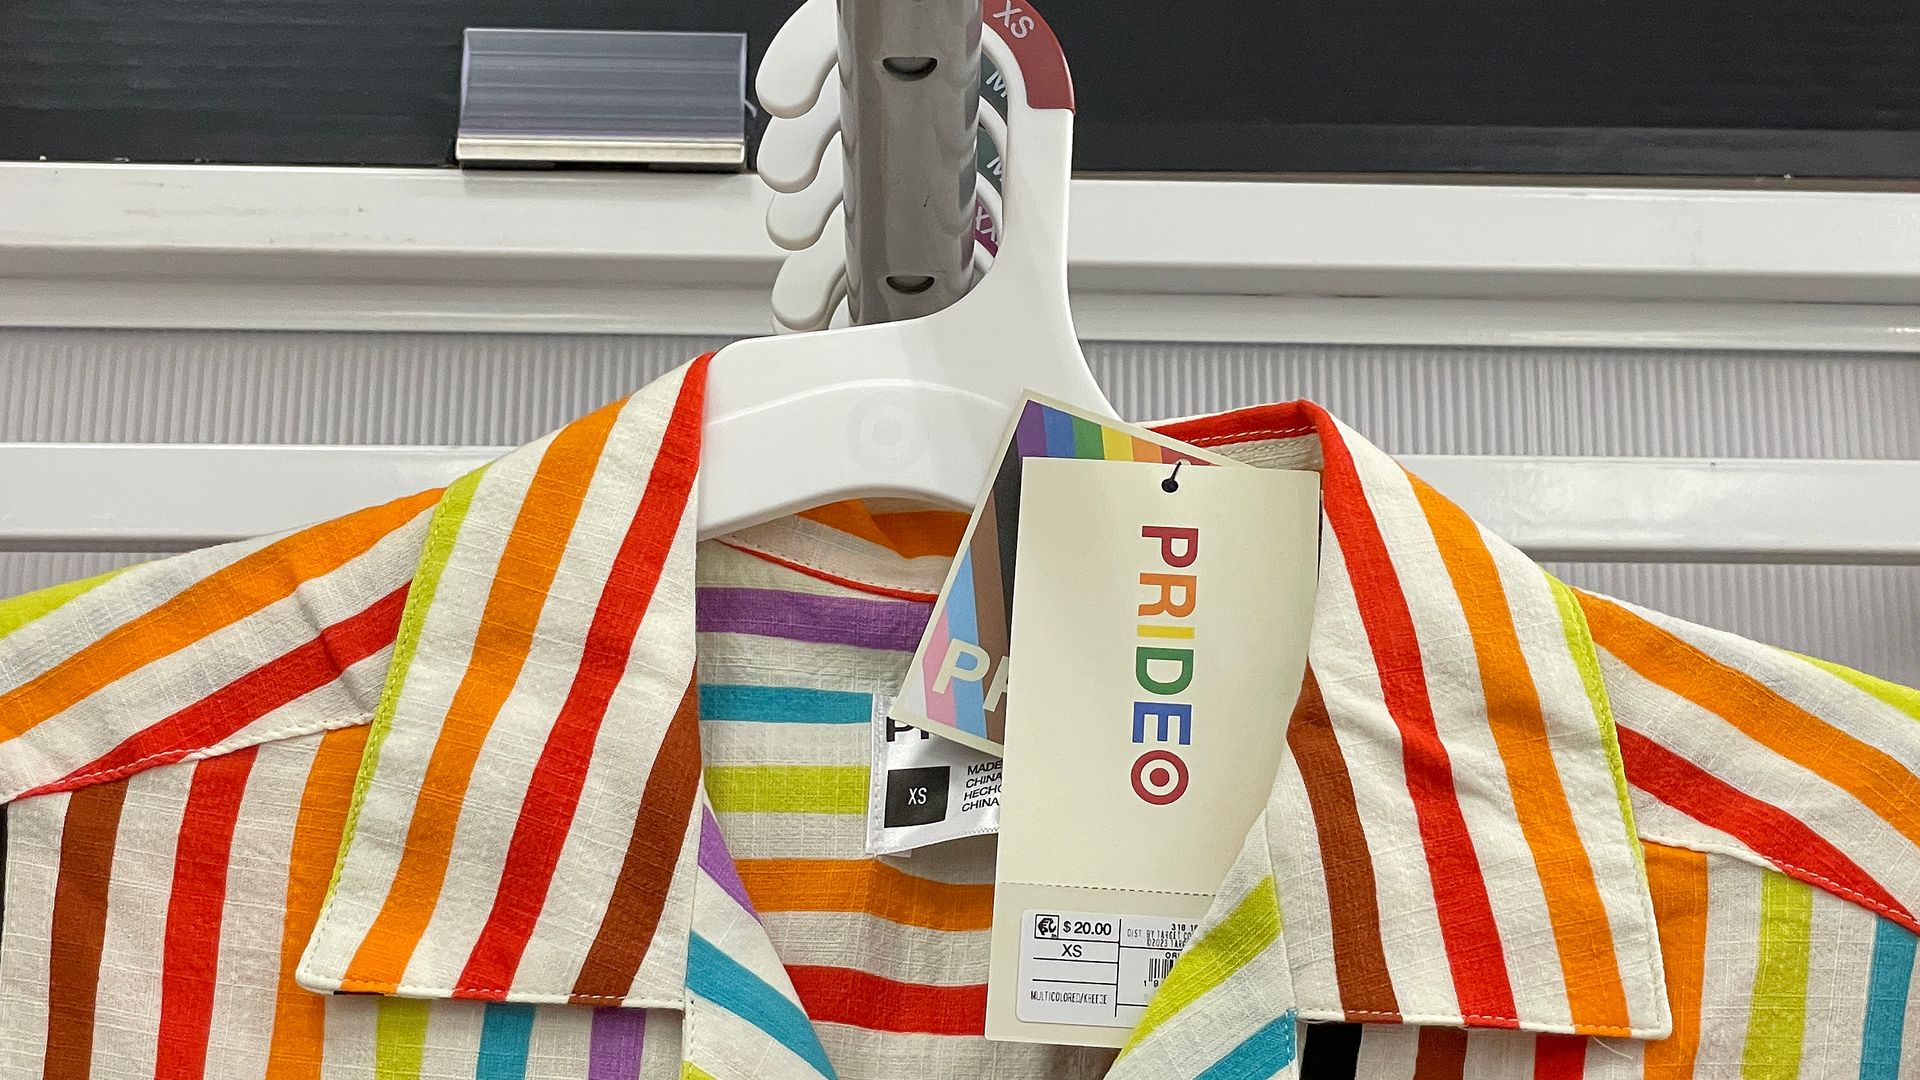 An investor is suing Target over its LGBTQ clothing scandal that led to a boycott and  billion drop in the company’s value.